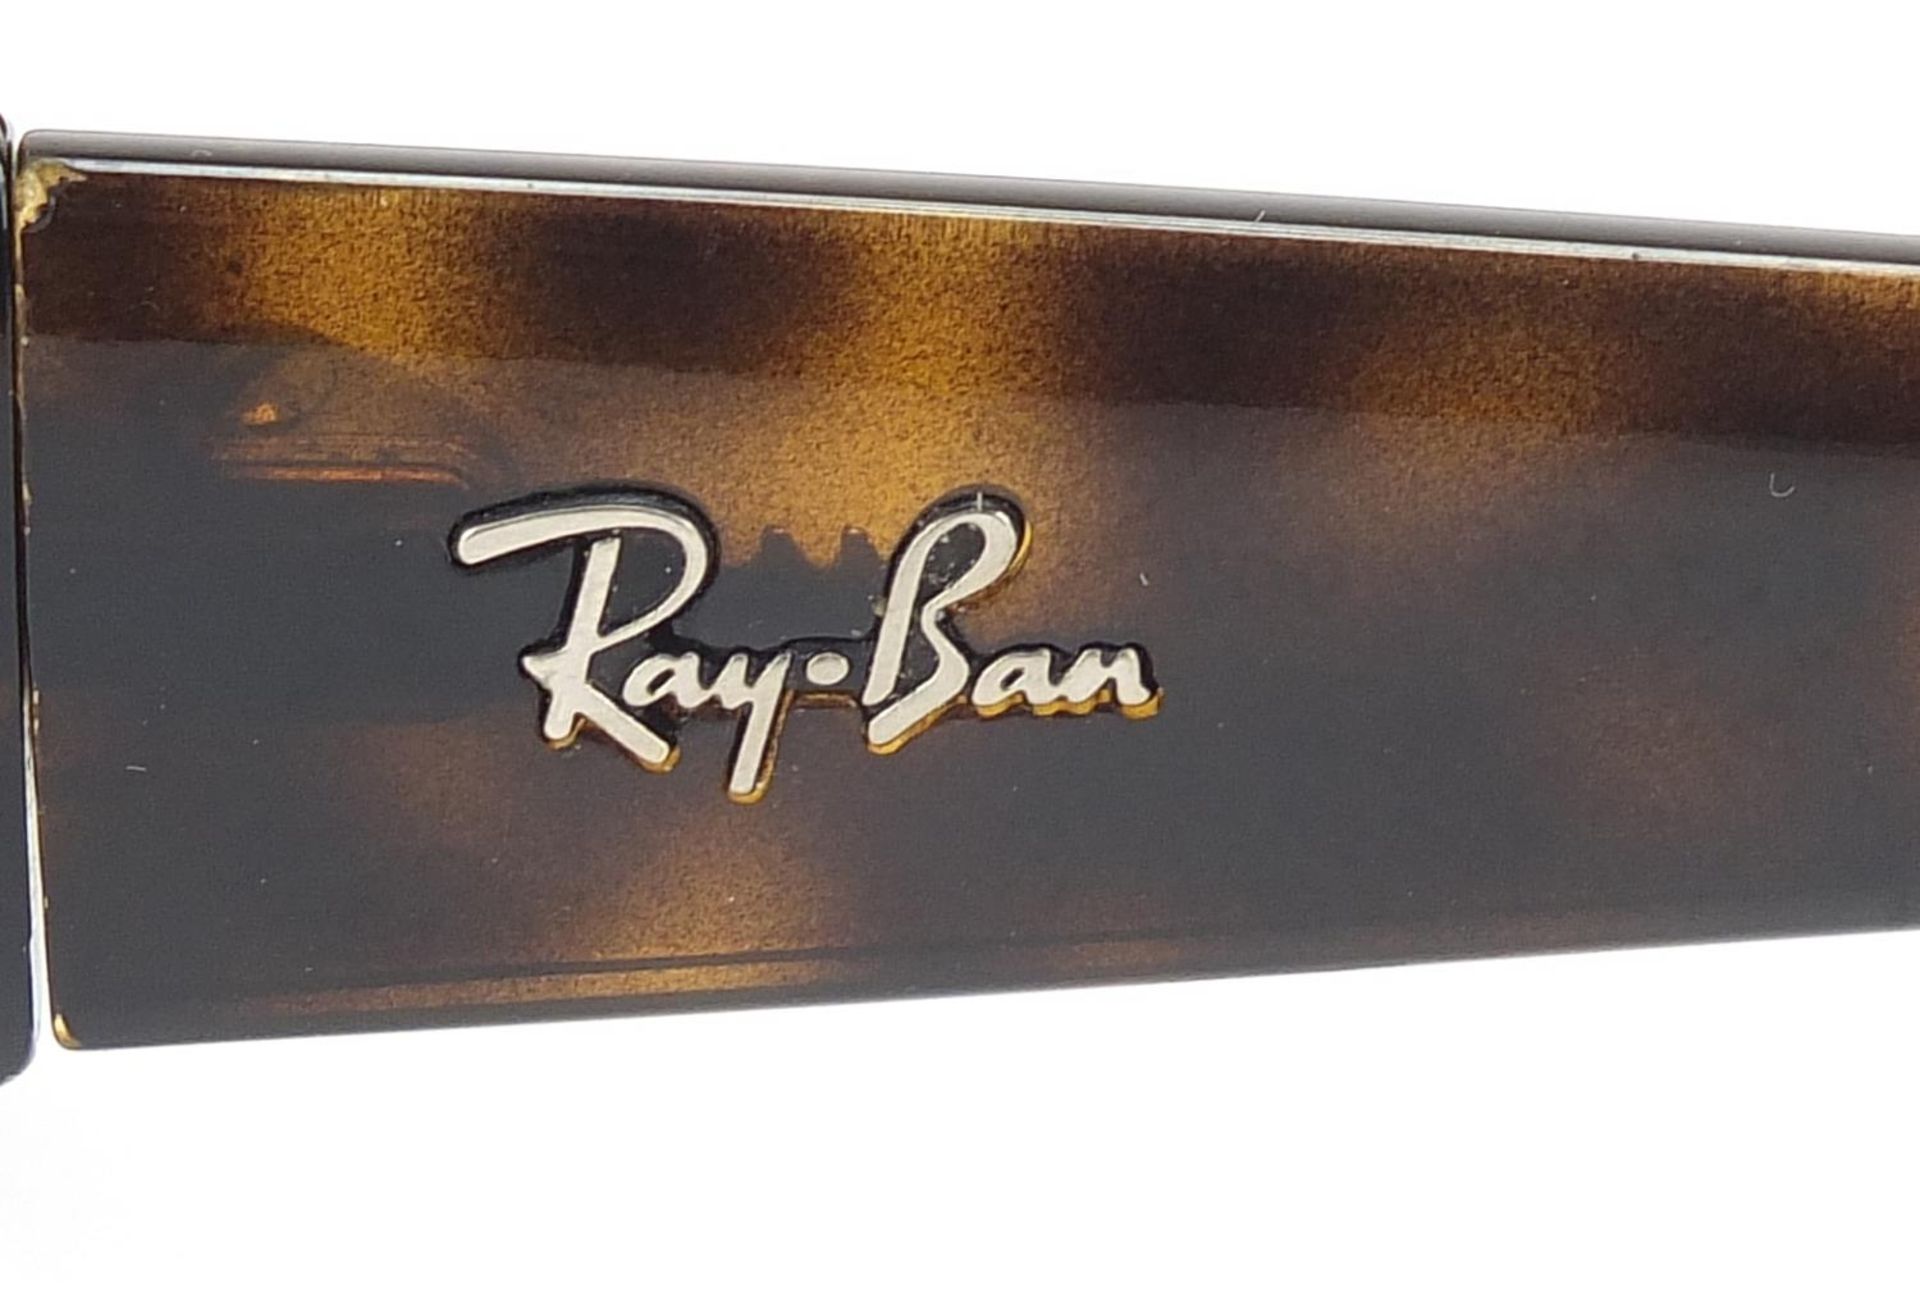 Cased pair of Ray-Ban tortoiseshell design sunglasses with cleaning cloth - Image 3 of 8